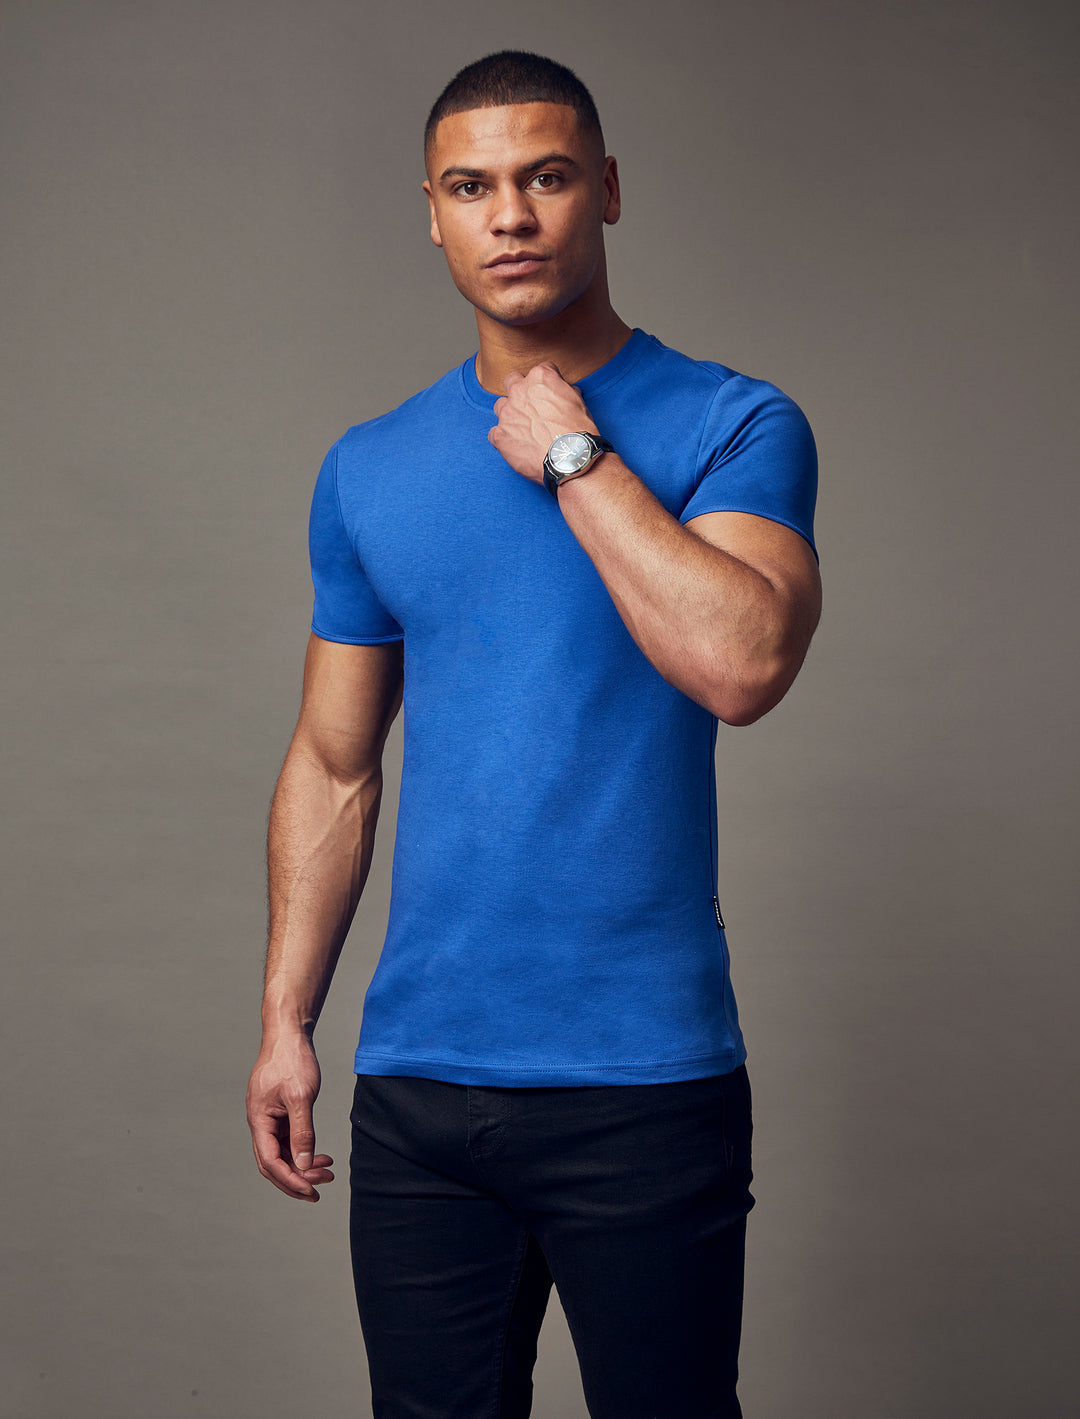 indigo blue muscle fit t-shirt, highlighting the tapered fit and superior quality offered by Tapered Menswear for the athletic man